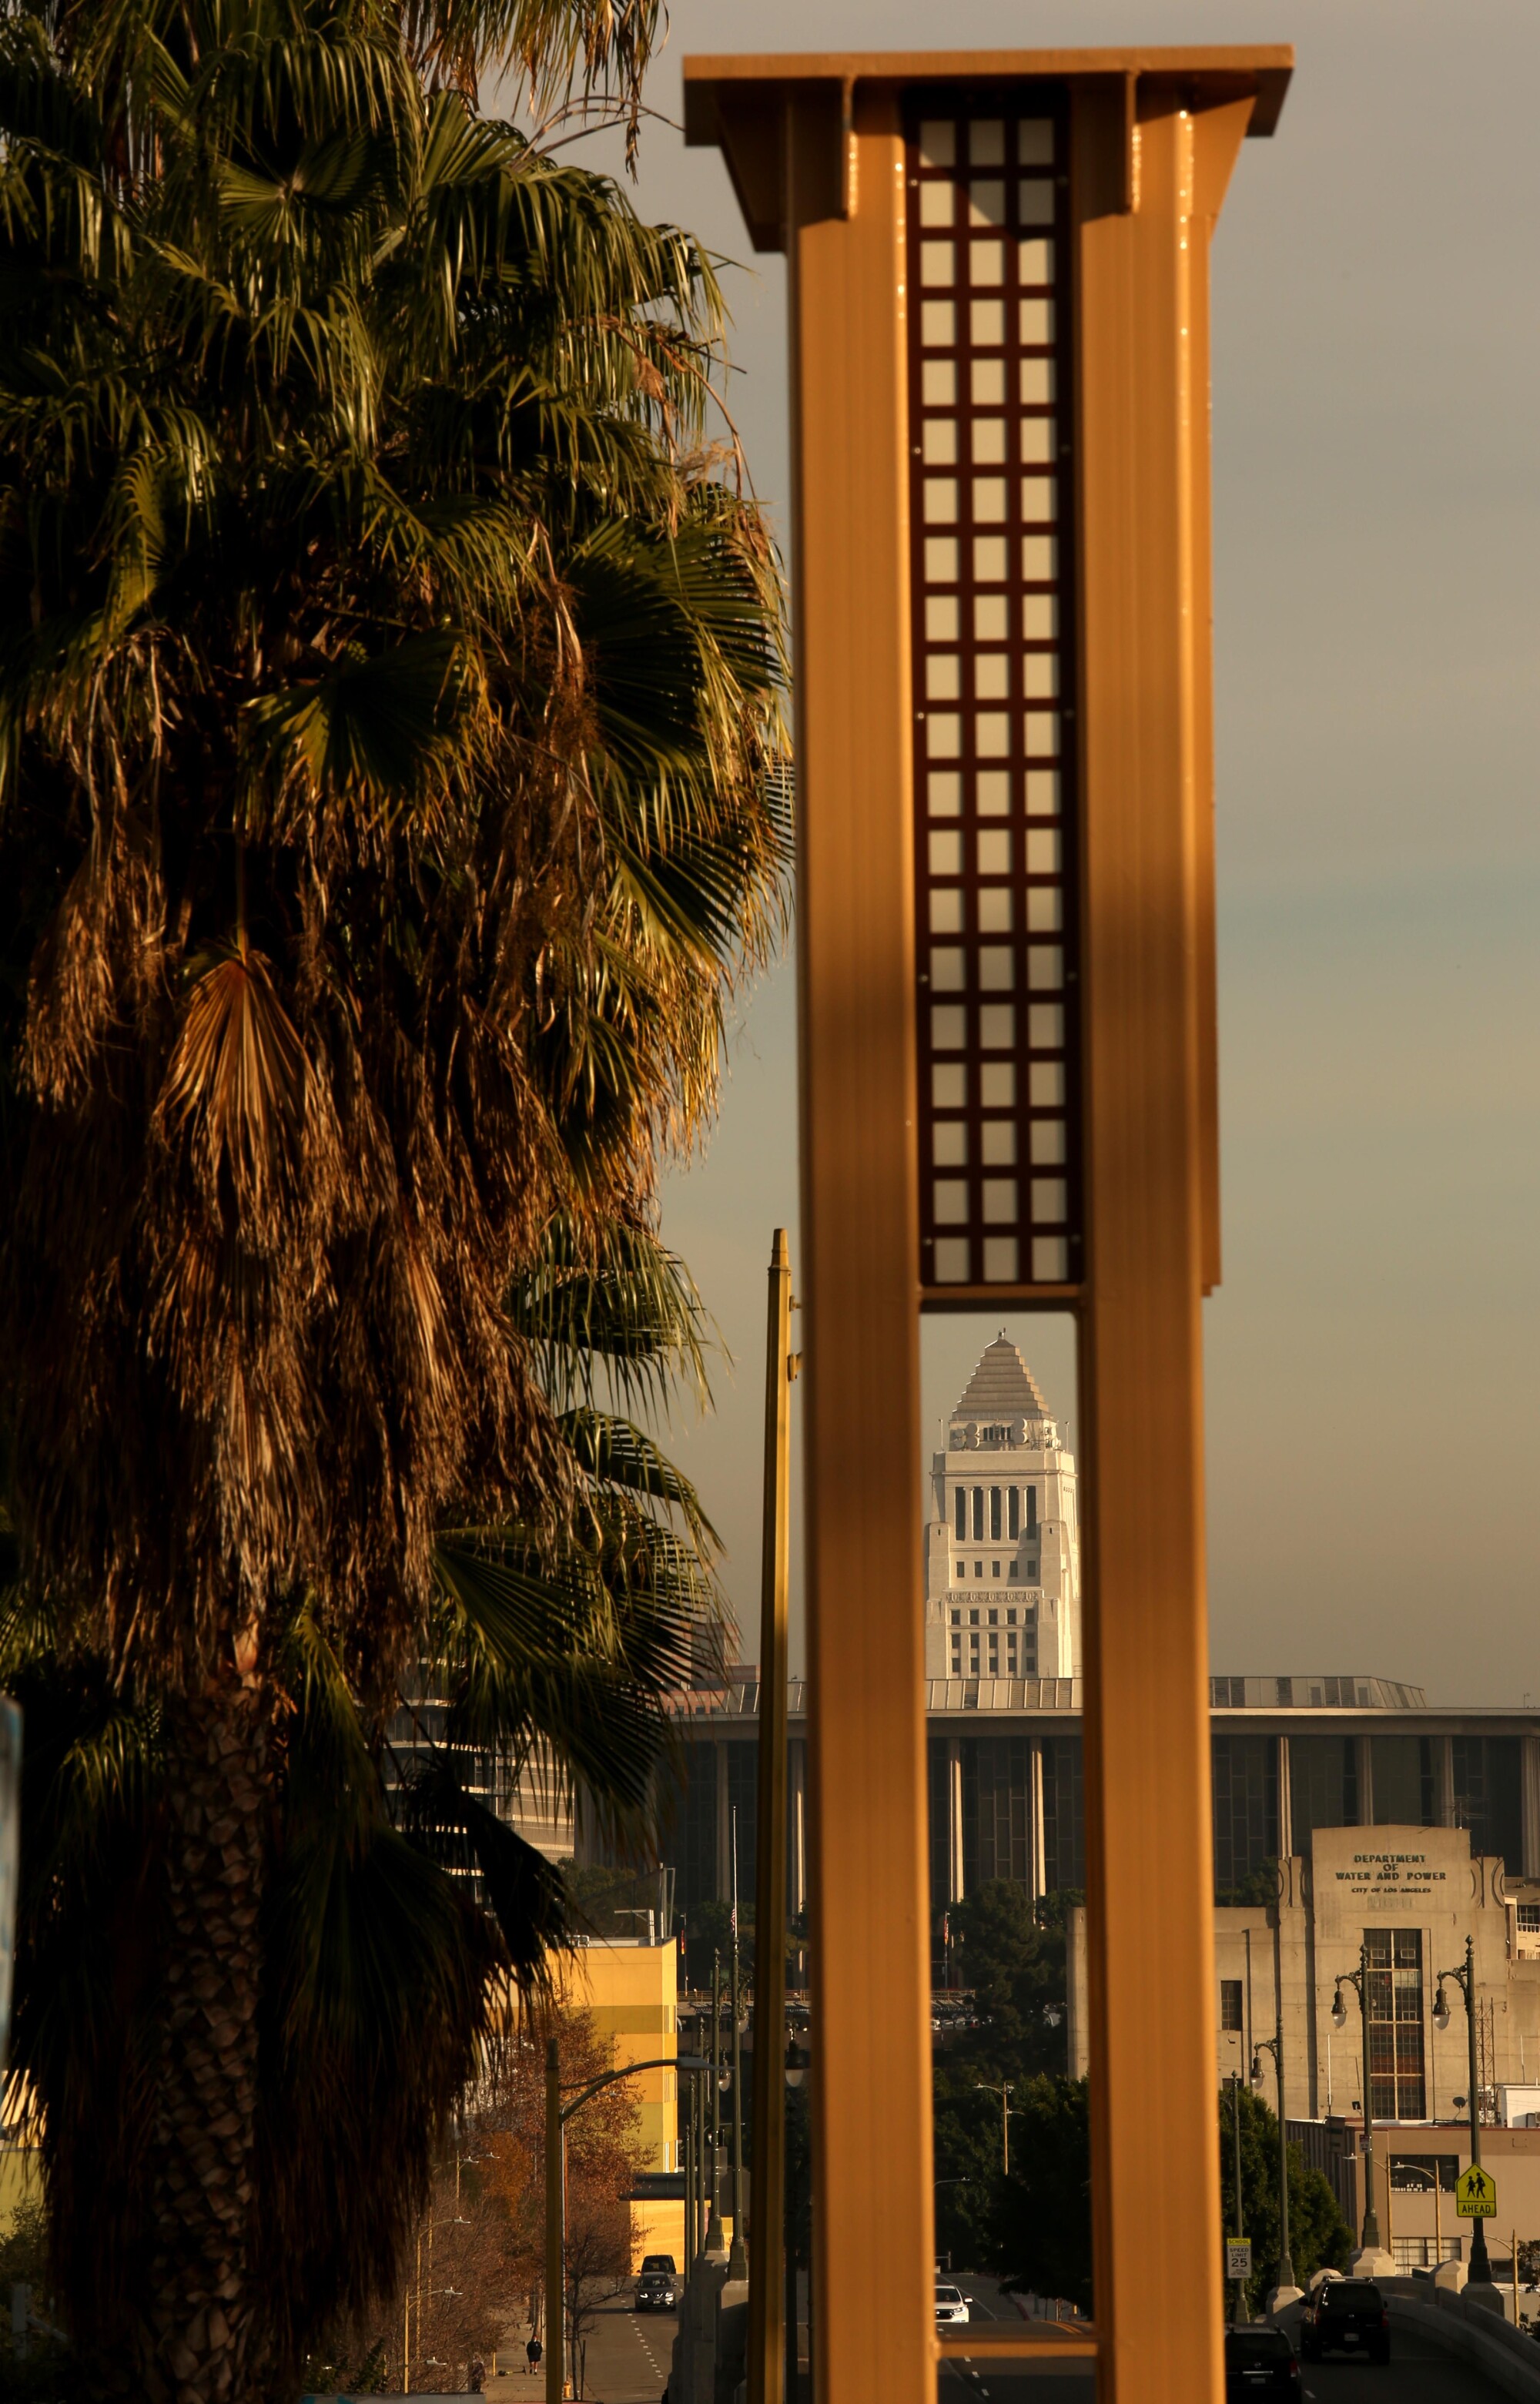 L.A. City Hall is framed by one of two towers for a gateway arch in Historic Filipinotown.